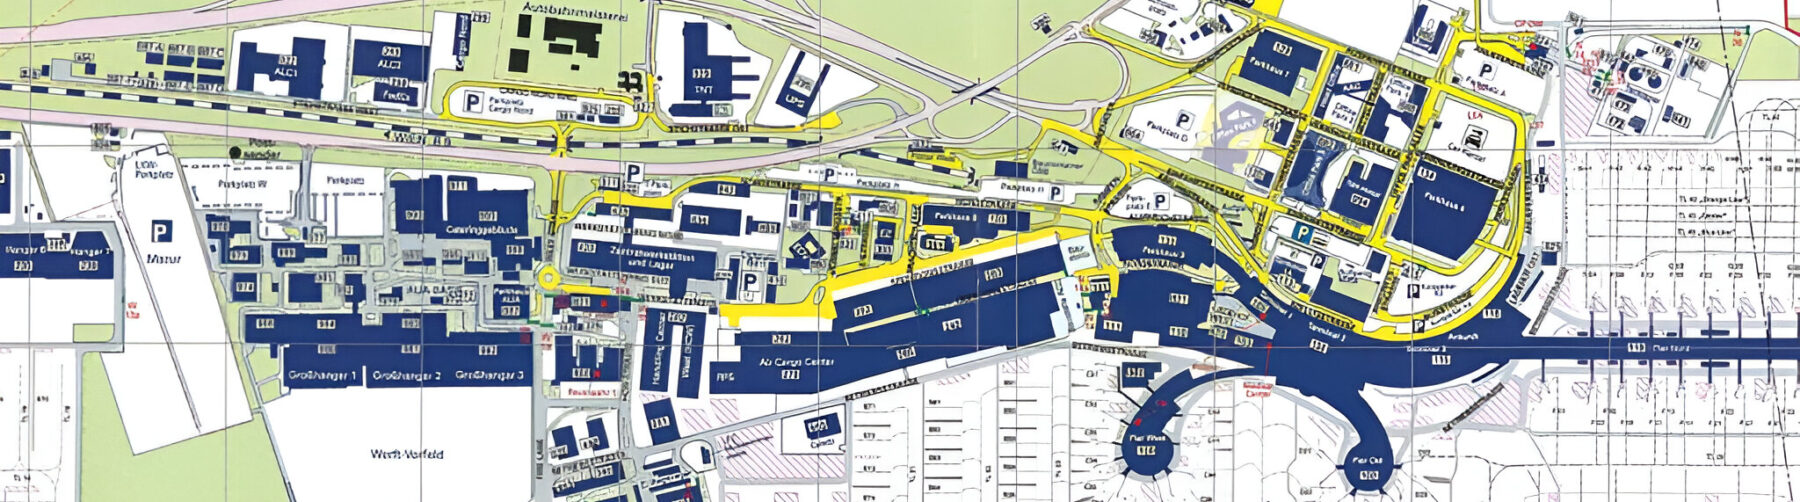 Plan of the Vienna AirportCity